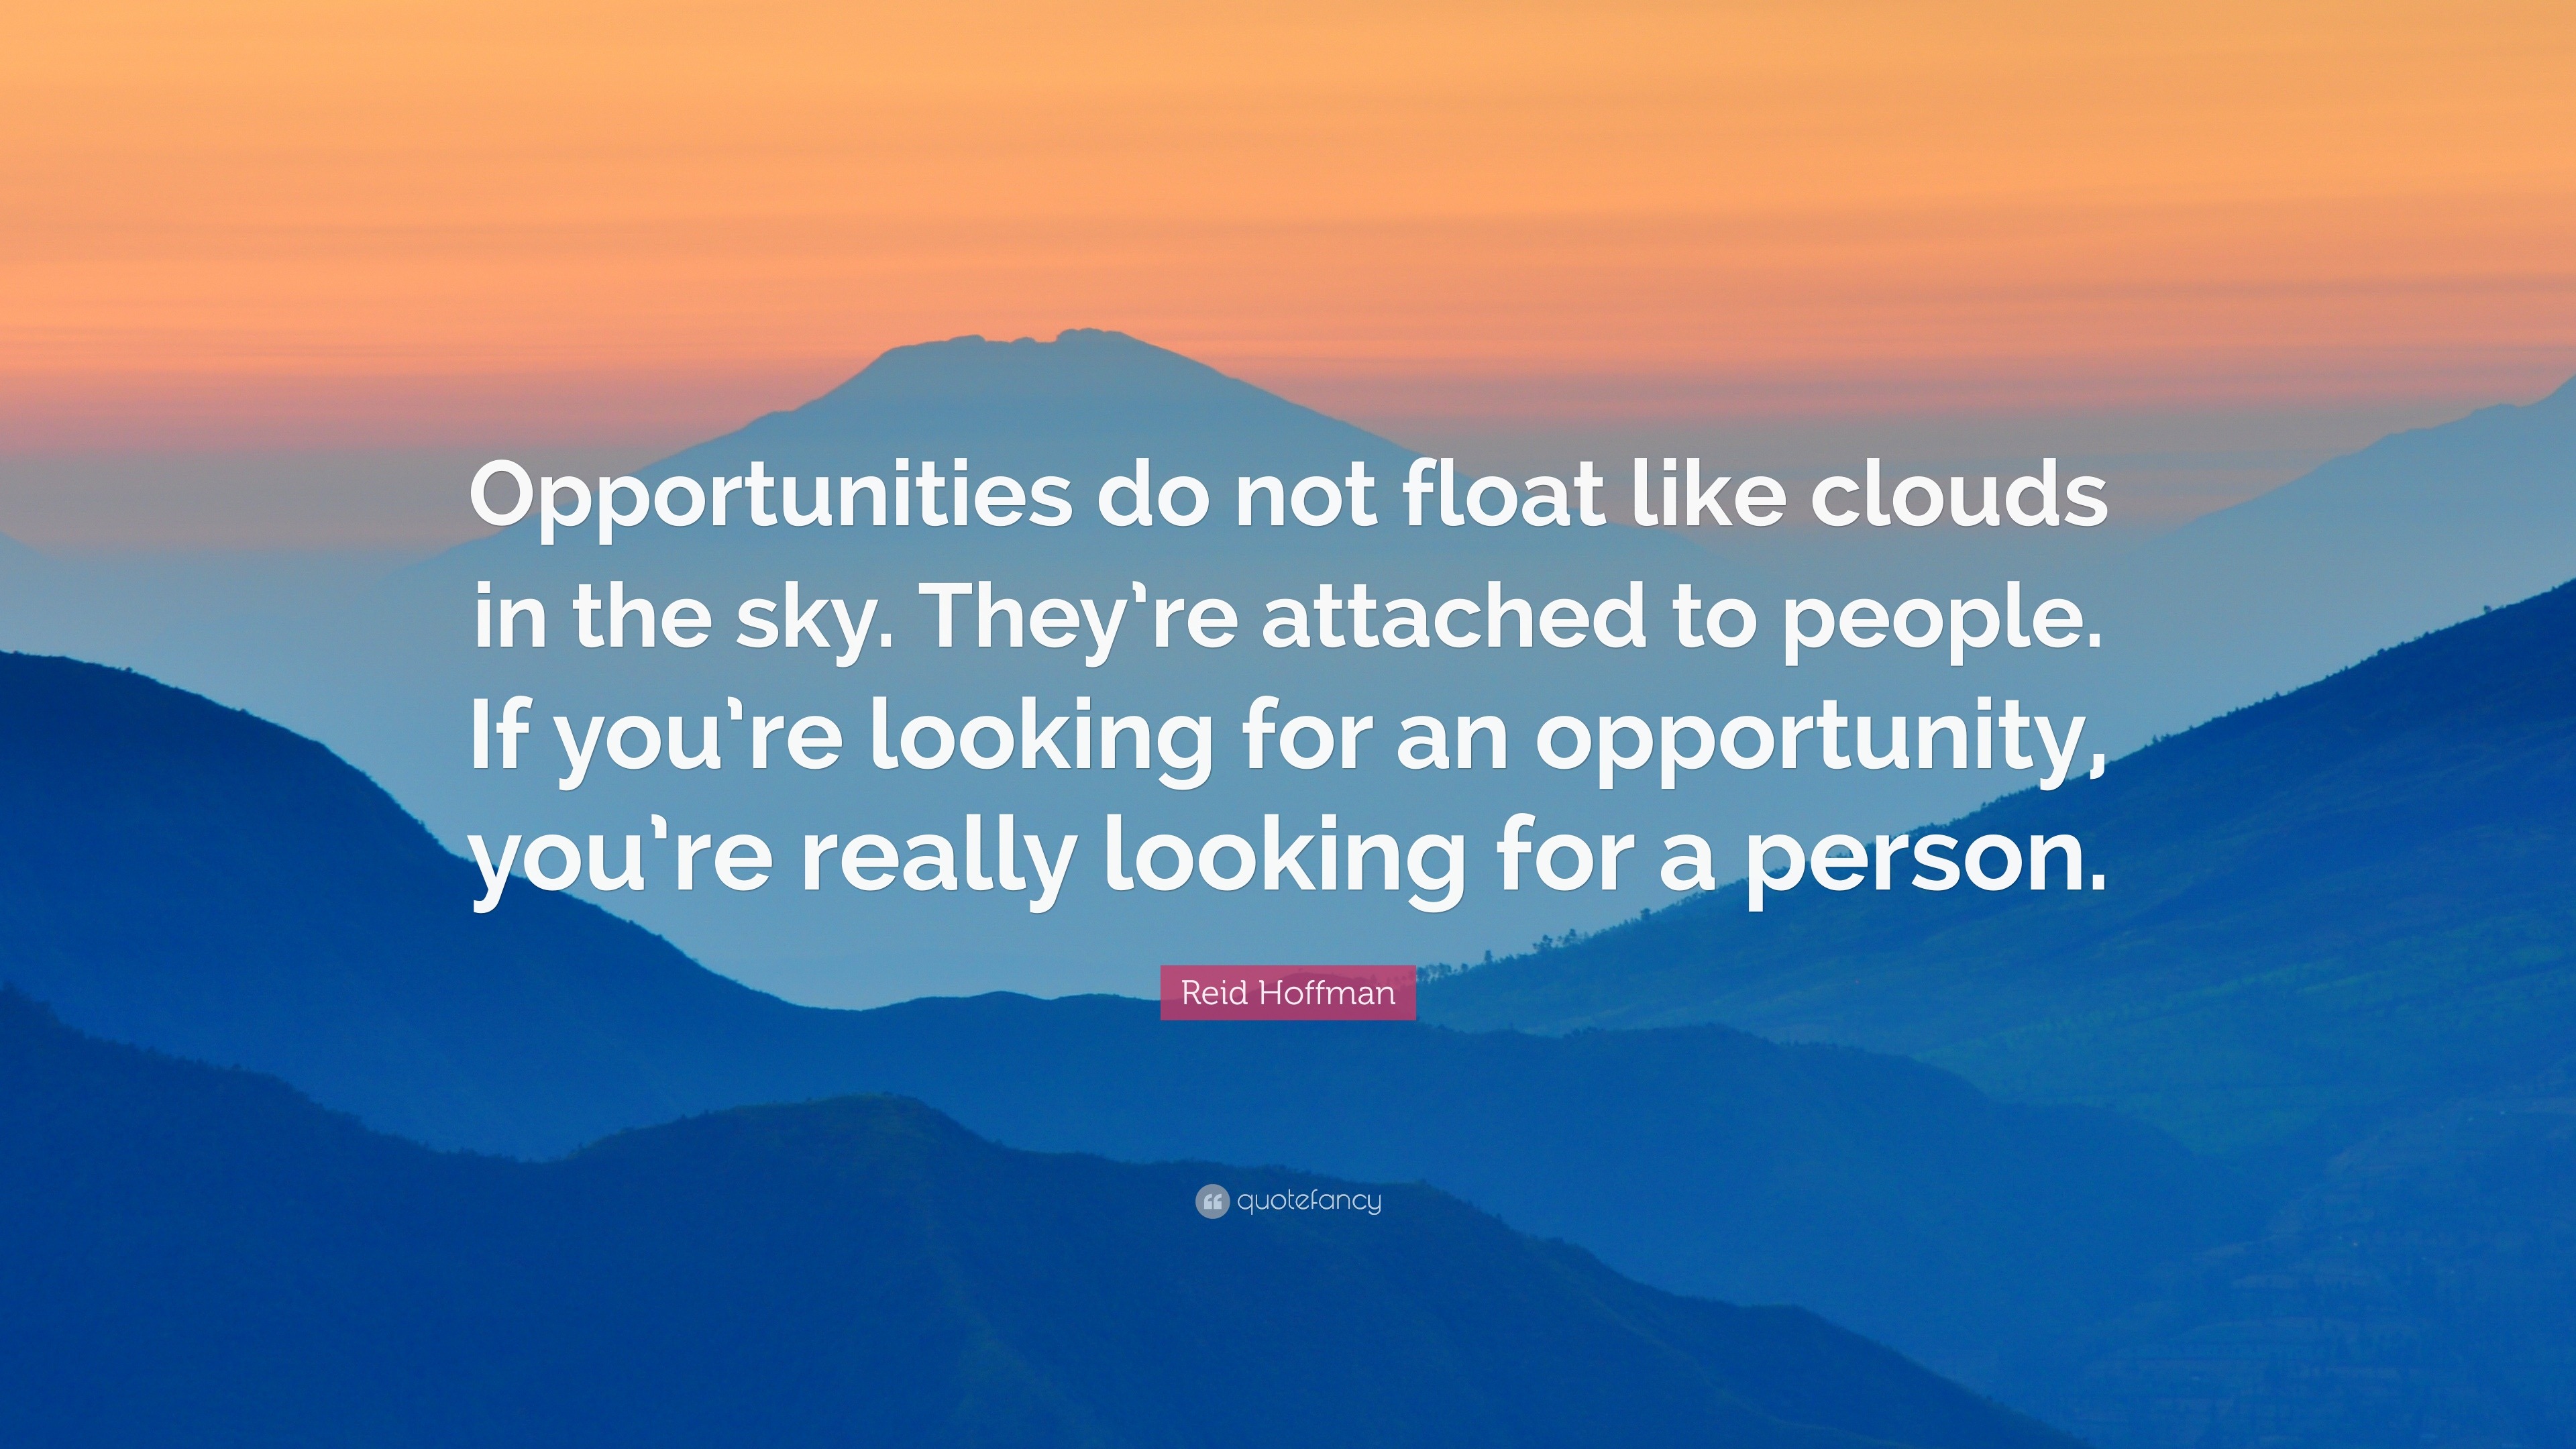 Opportunities do not float like clouds in the sky